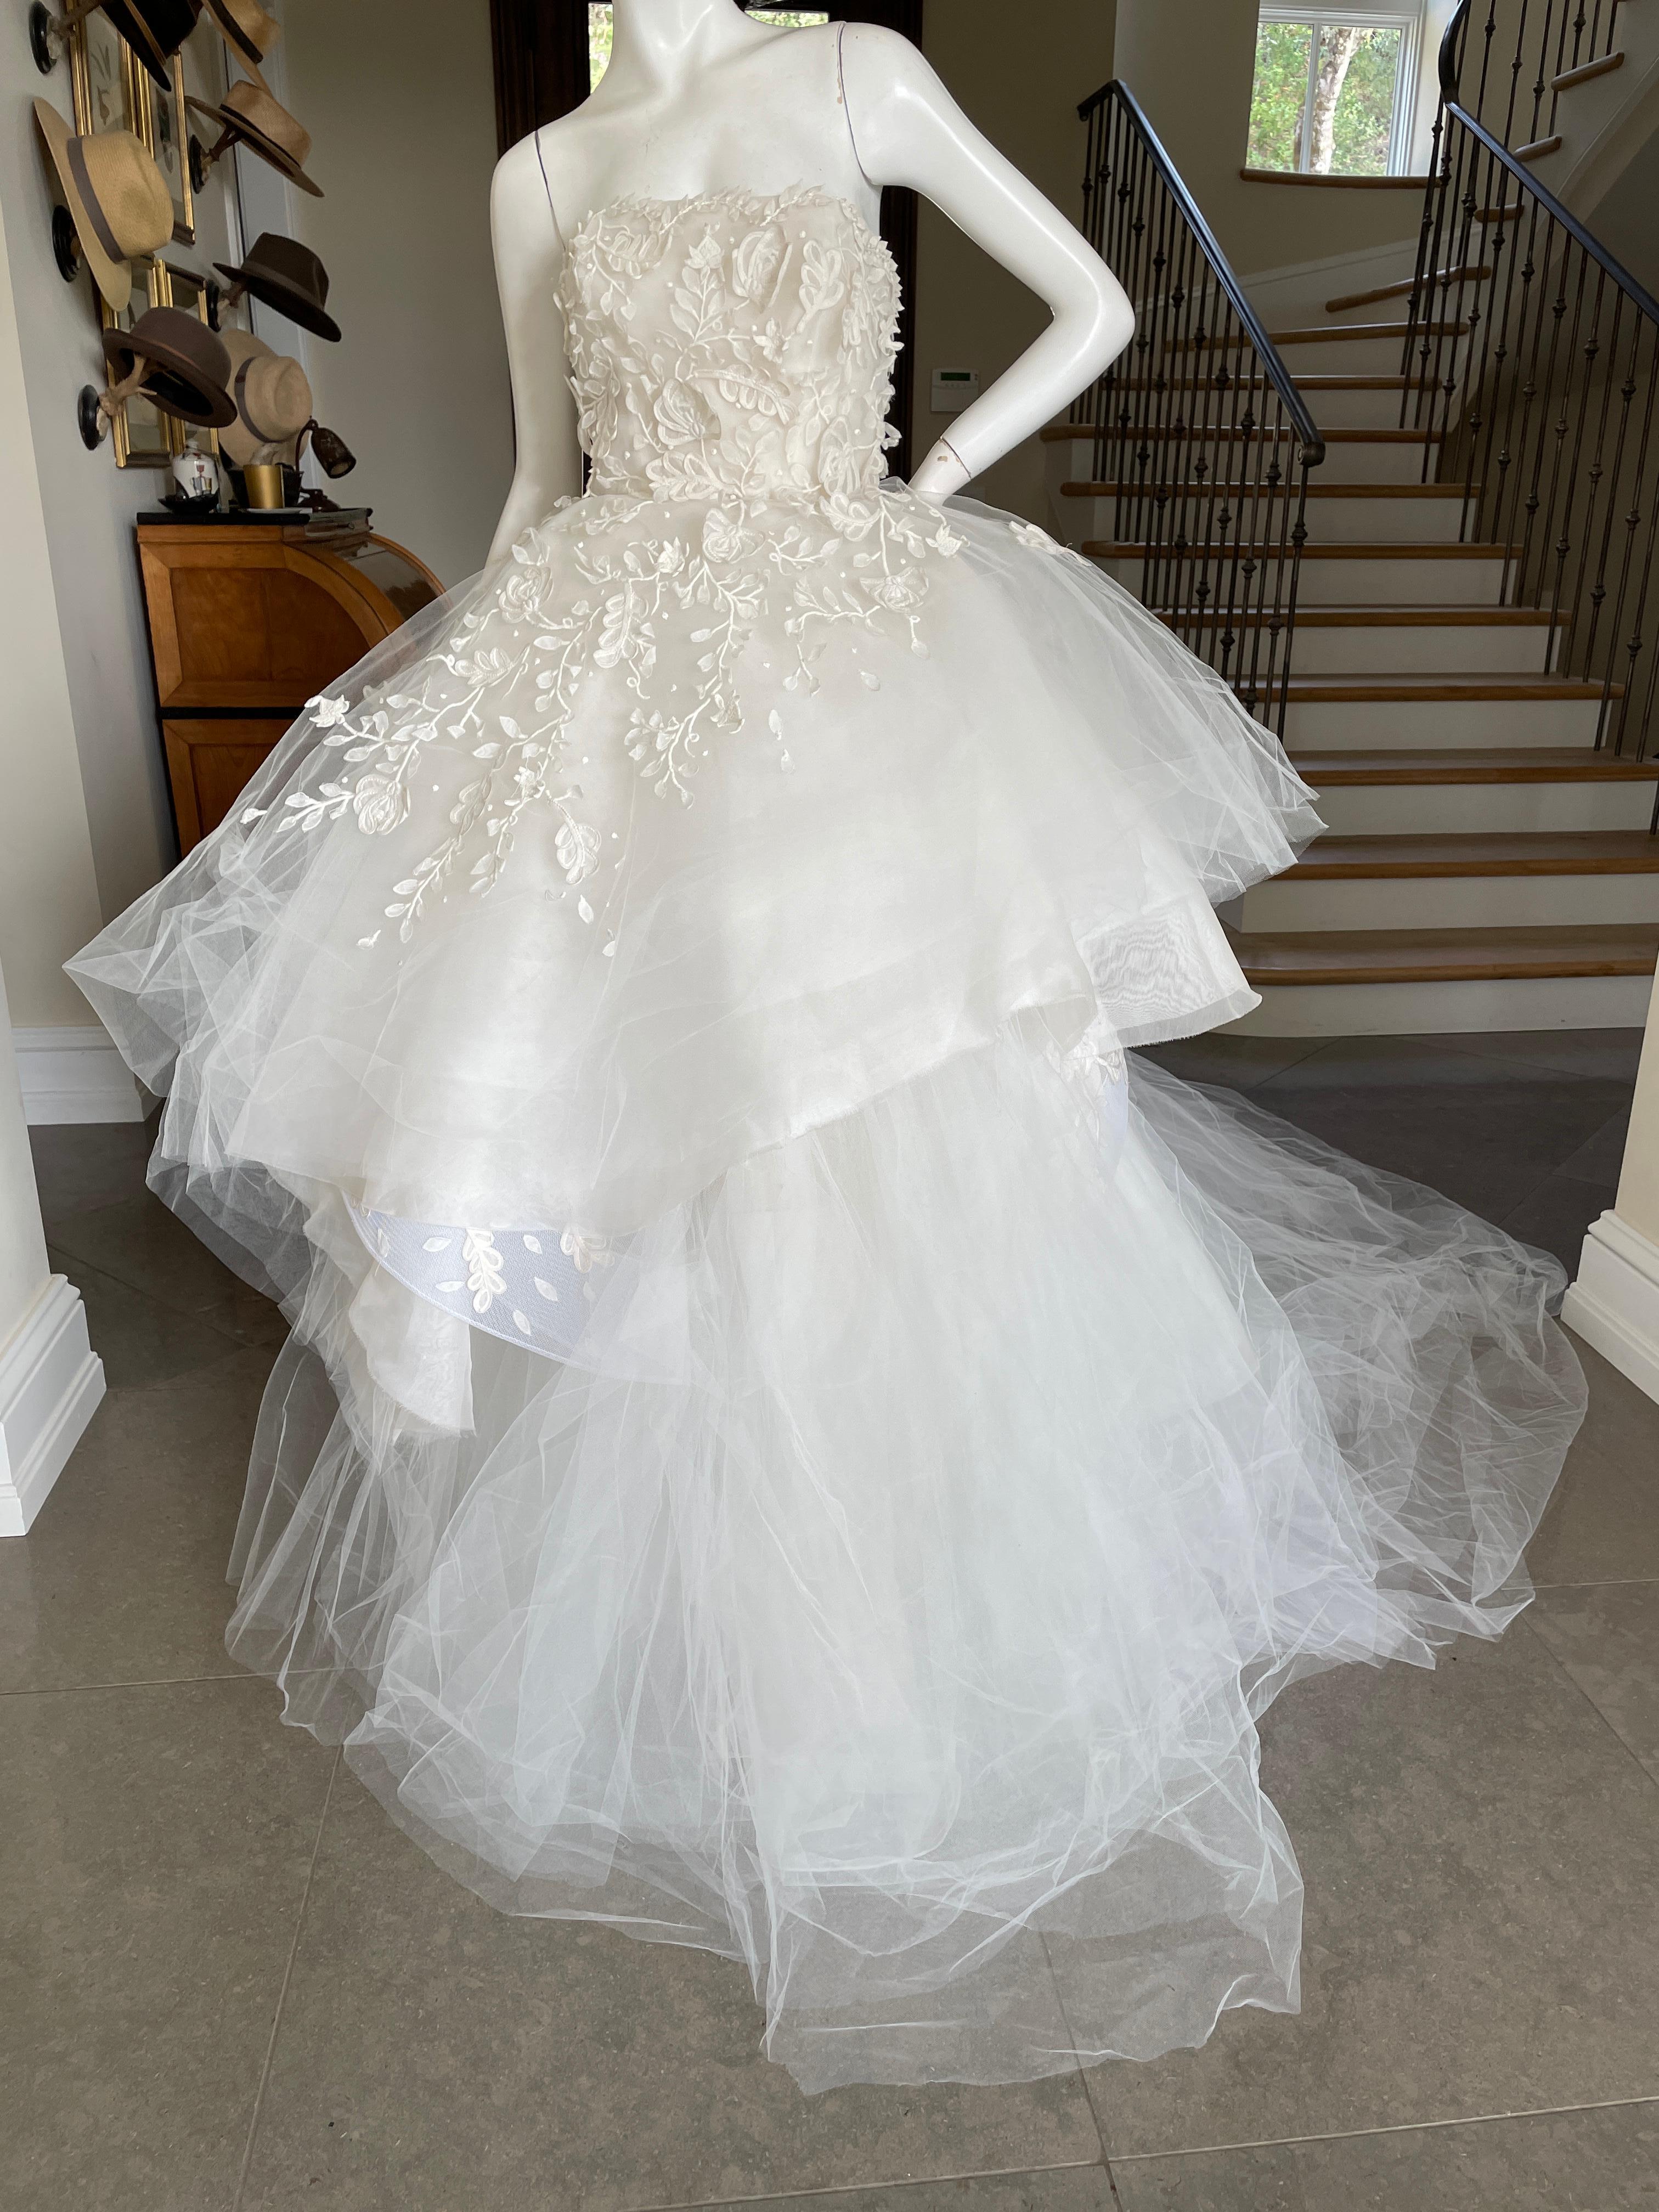 Oscar de la Renta Bridal Dramatic strapless wedding gown.
  Stunning. Please use the zoom feature to see all the remarkable details.
 Size 8
Bust 36